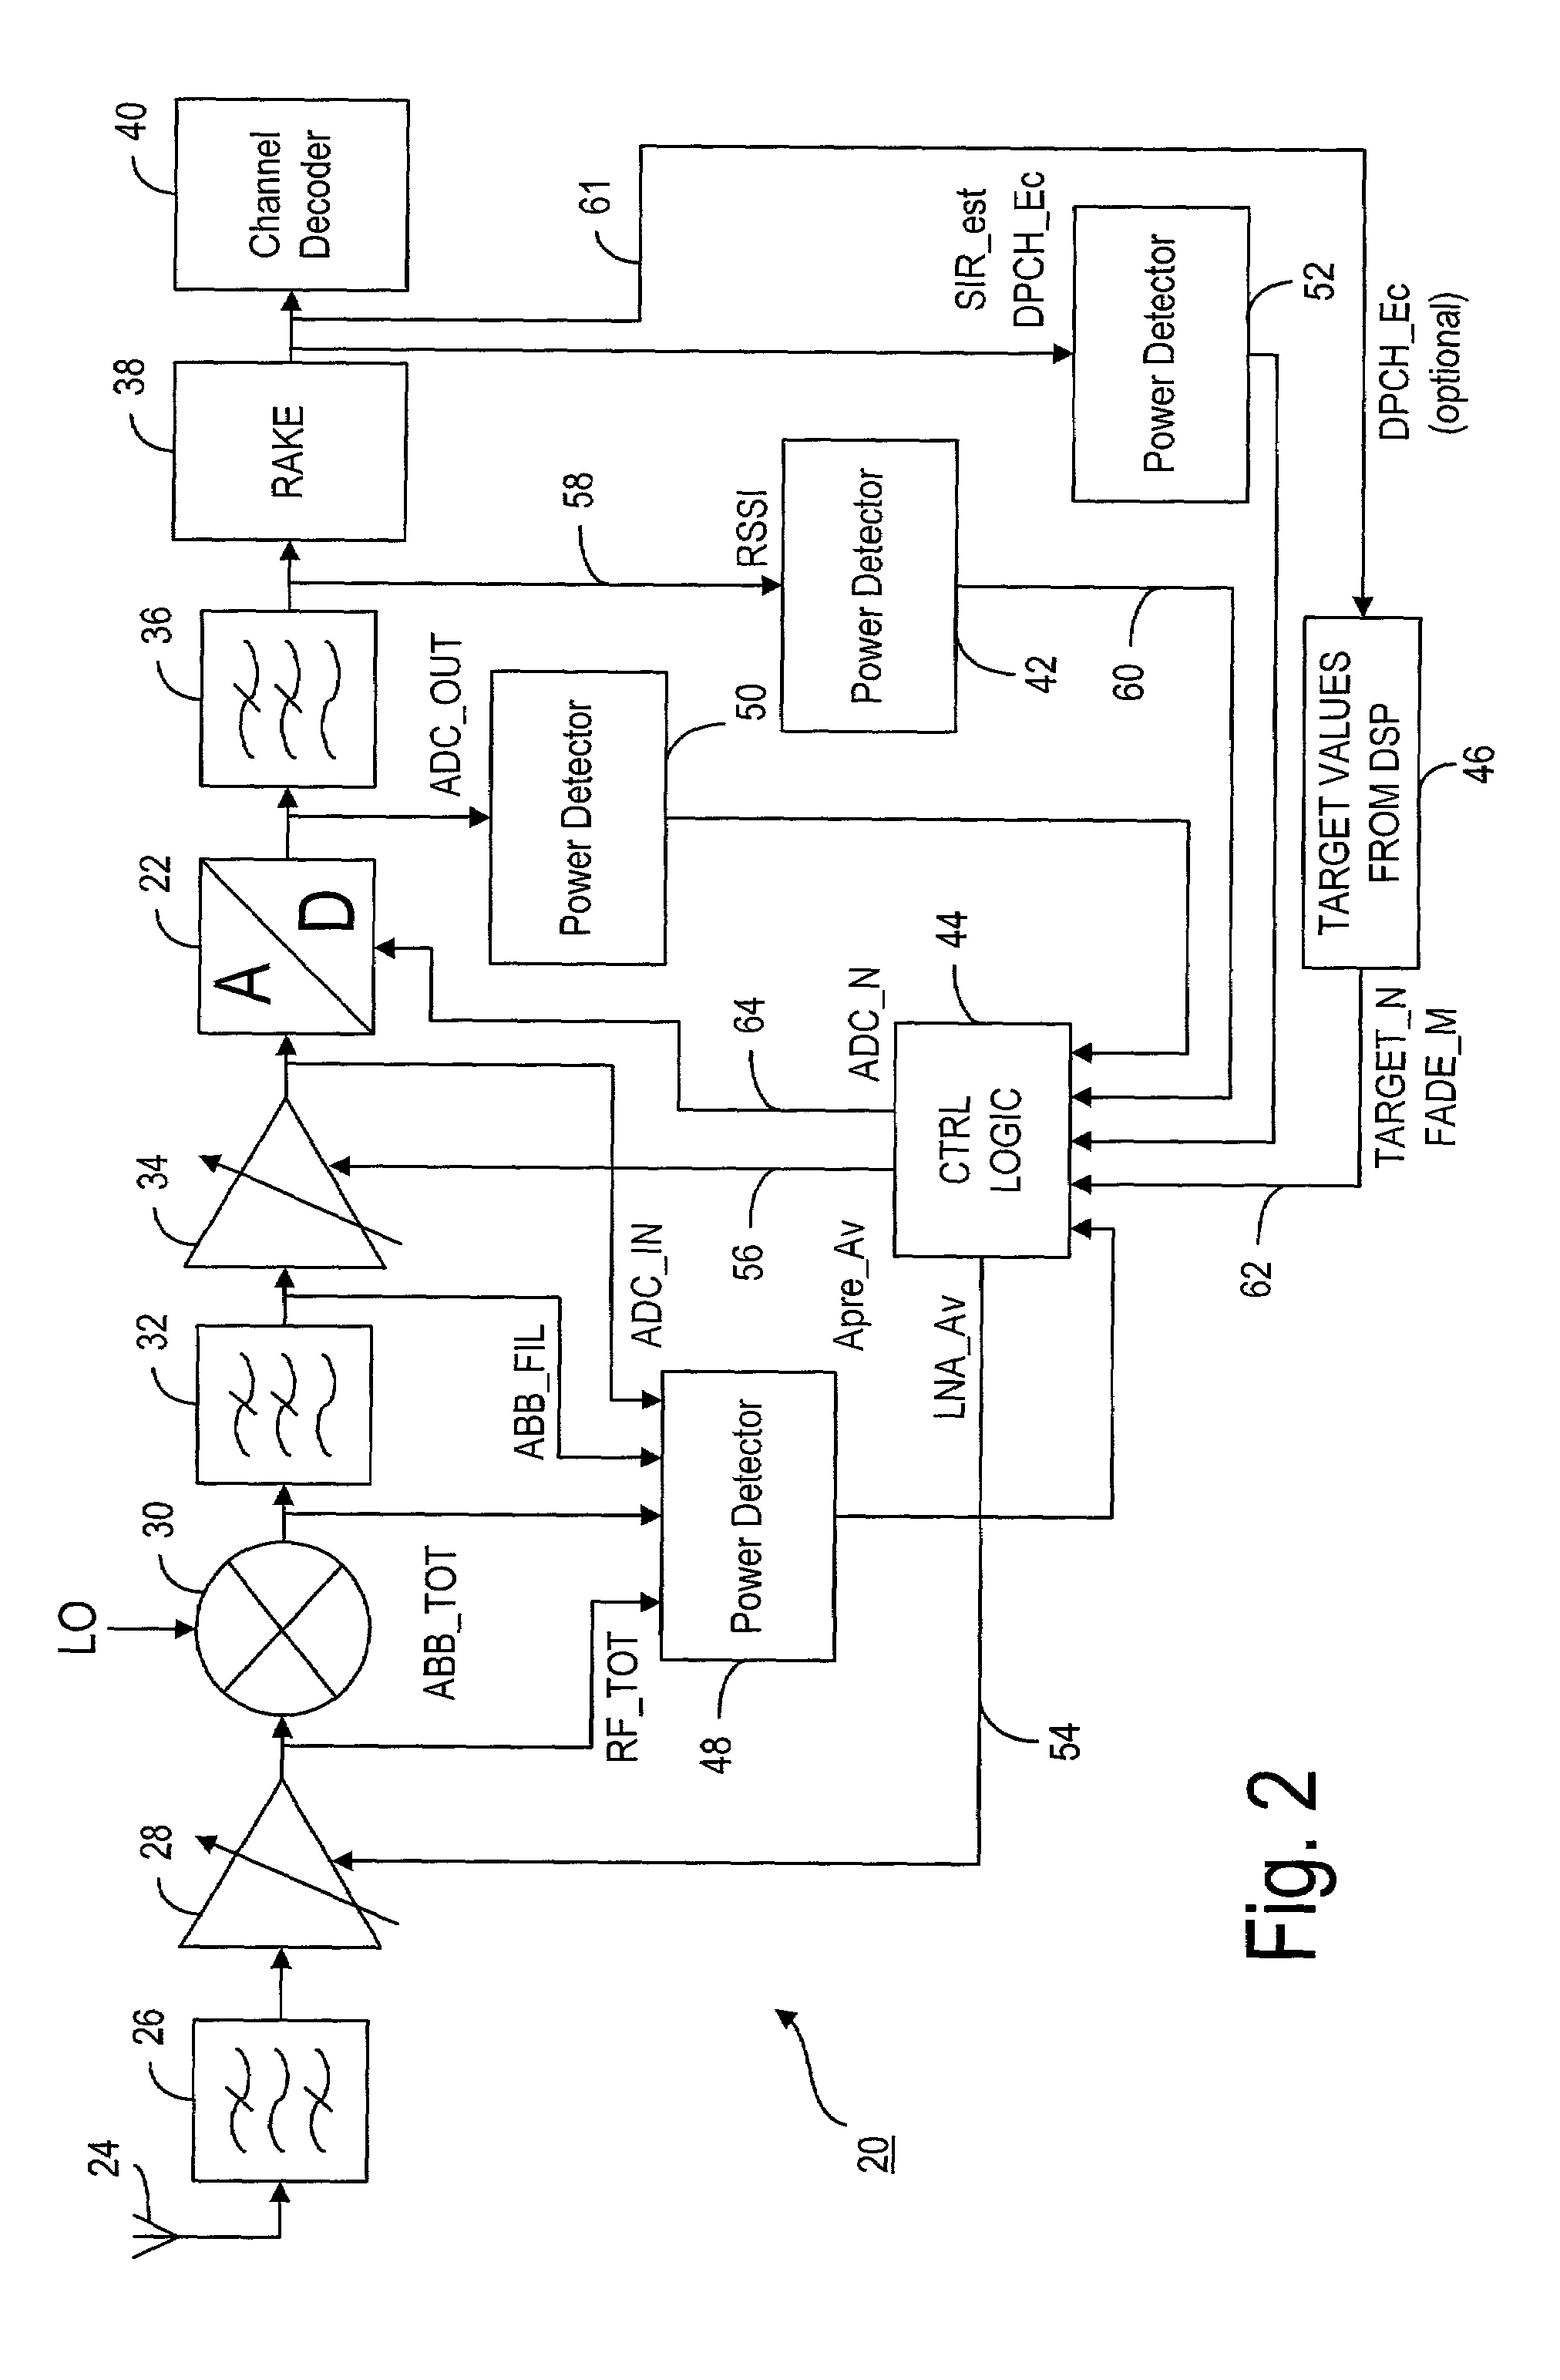 Method and apparatus for continuously controlling the dynamic range from an analog-to-digital converter